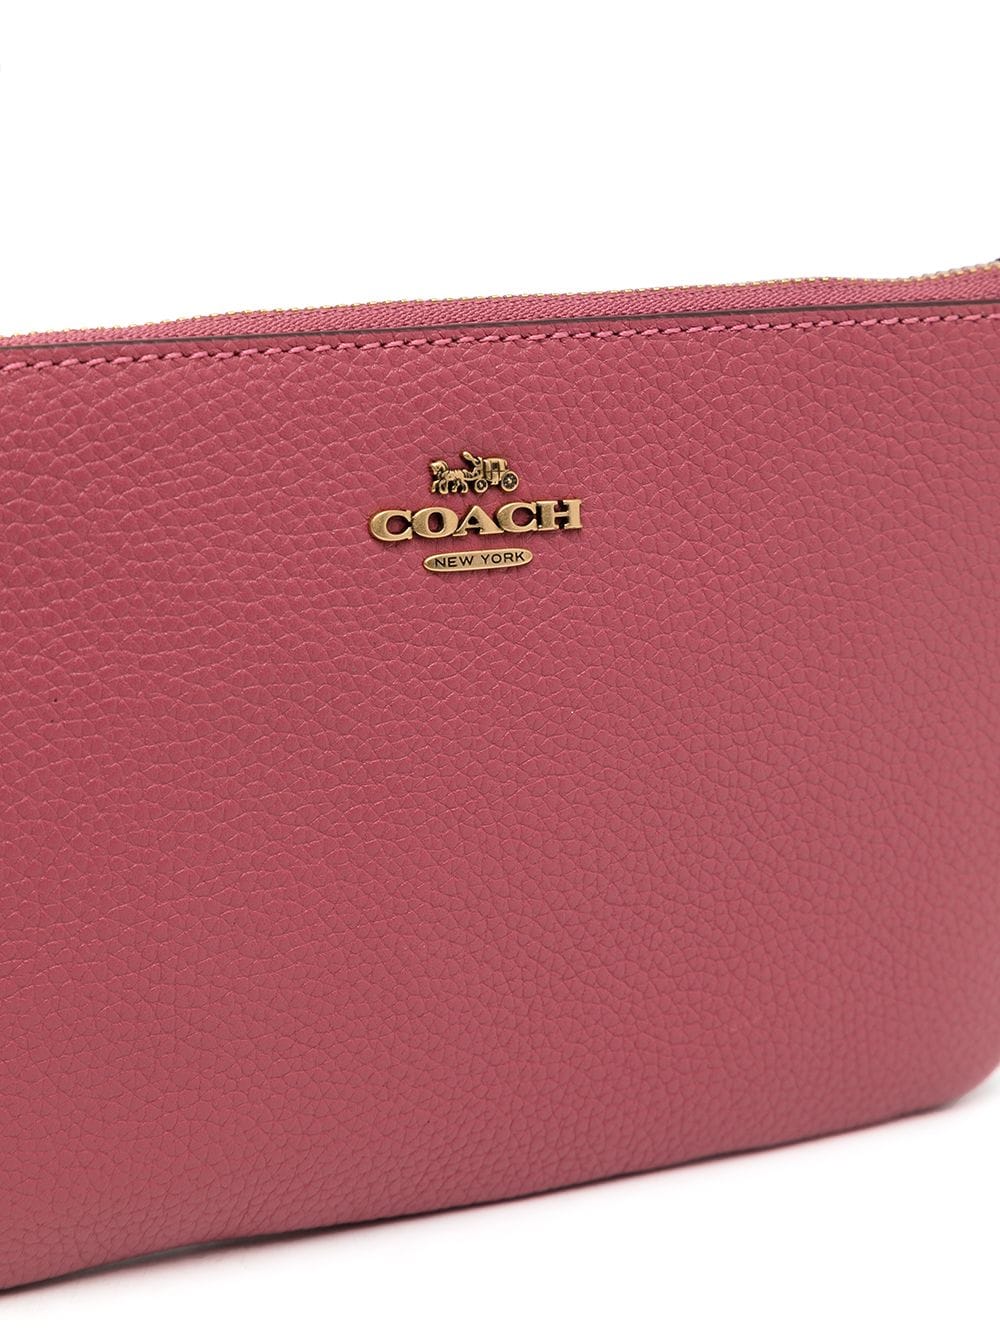 Coach Polished Pebble Leather Small Wristlet,  Green, One